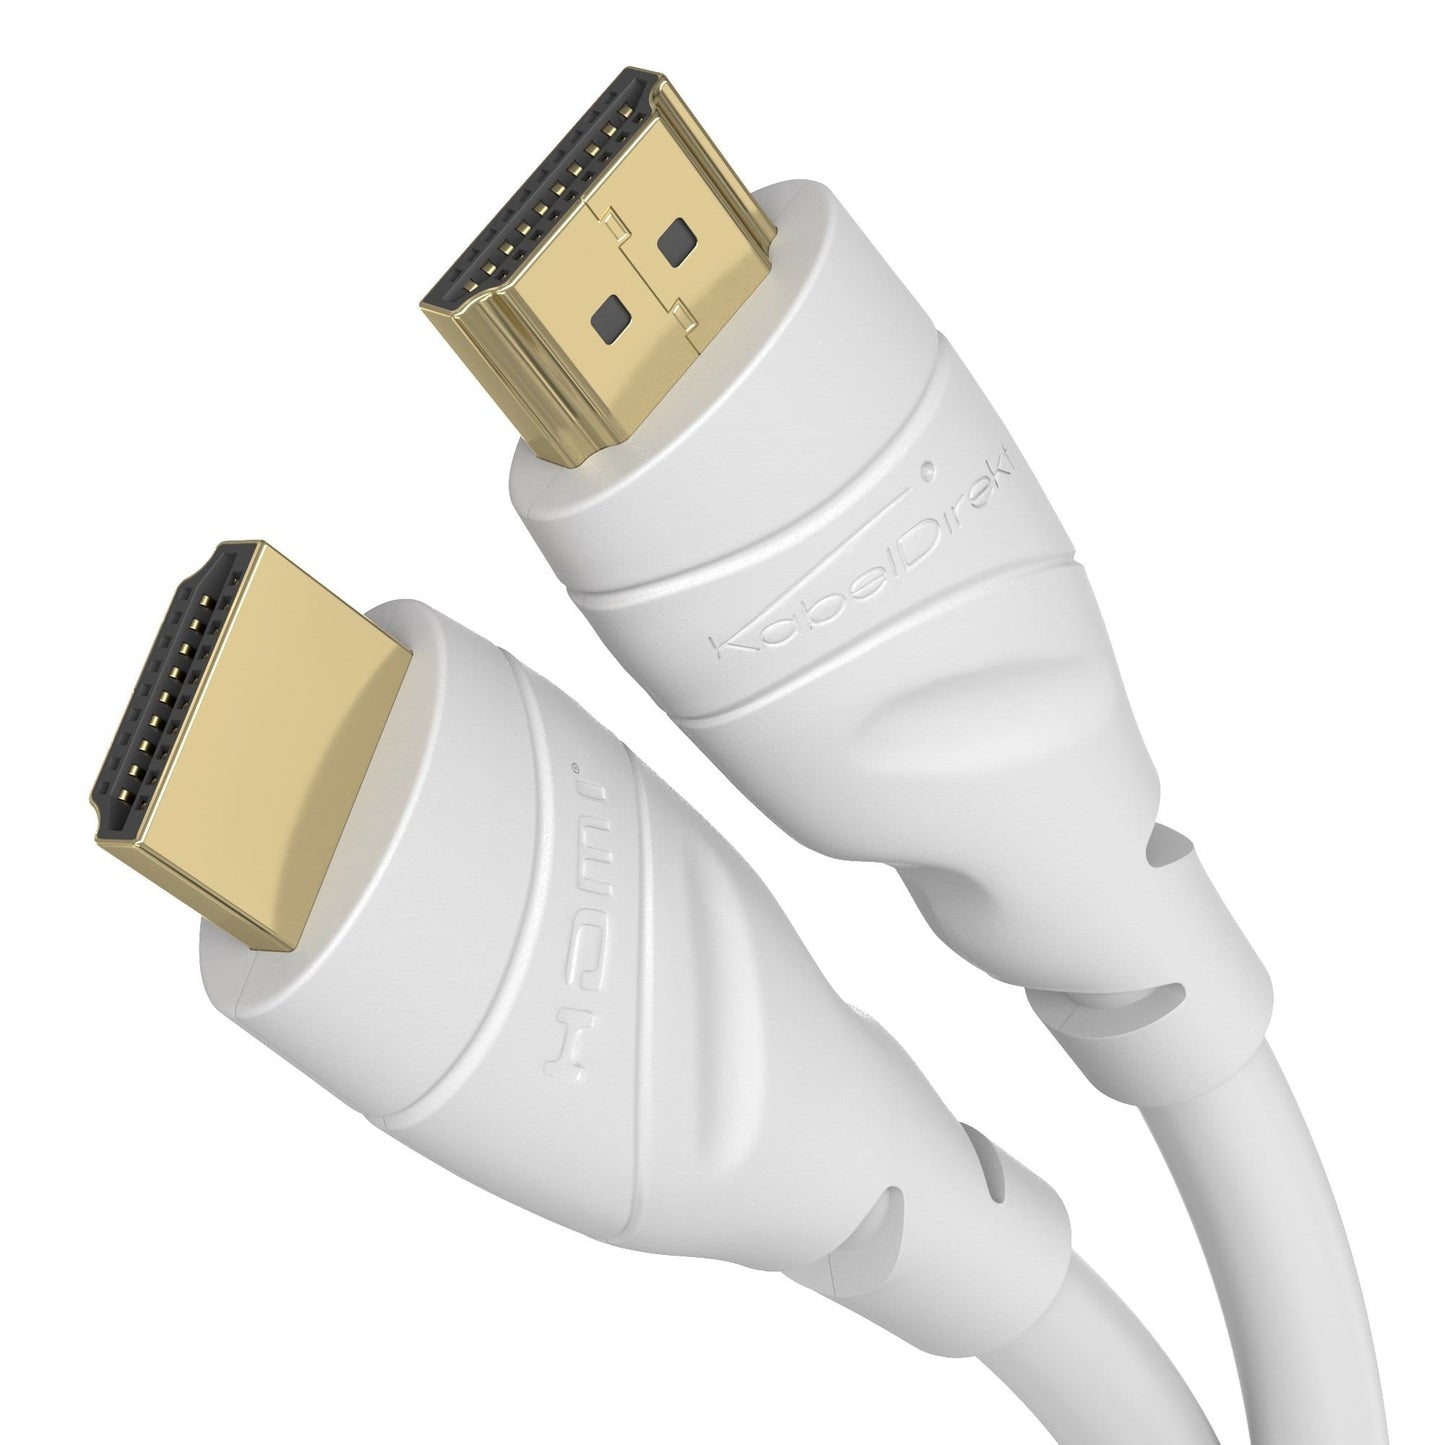 White 4K HDMI cable – with Ethernet, 4K/8K, 3D, ARC, HDR, 7.1 surround sound